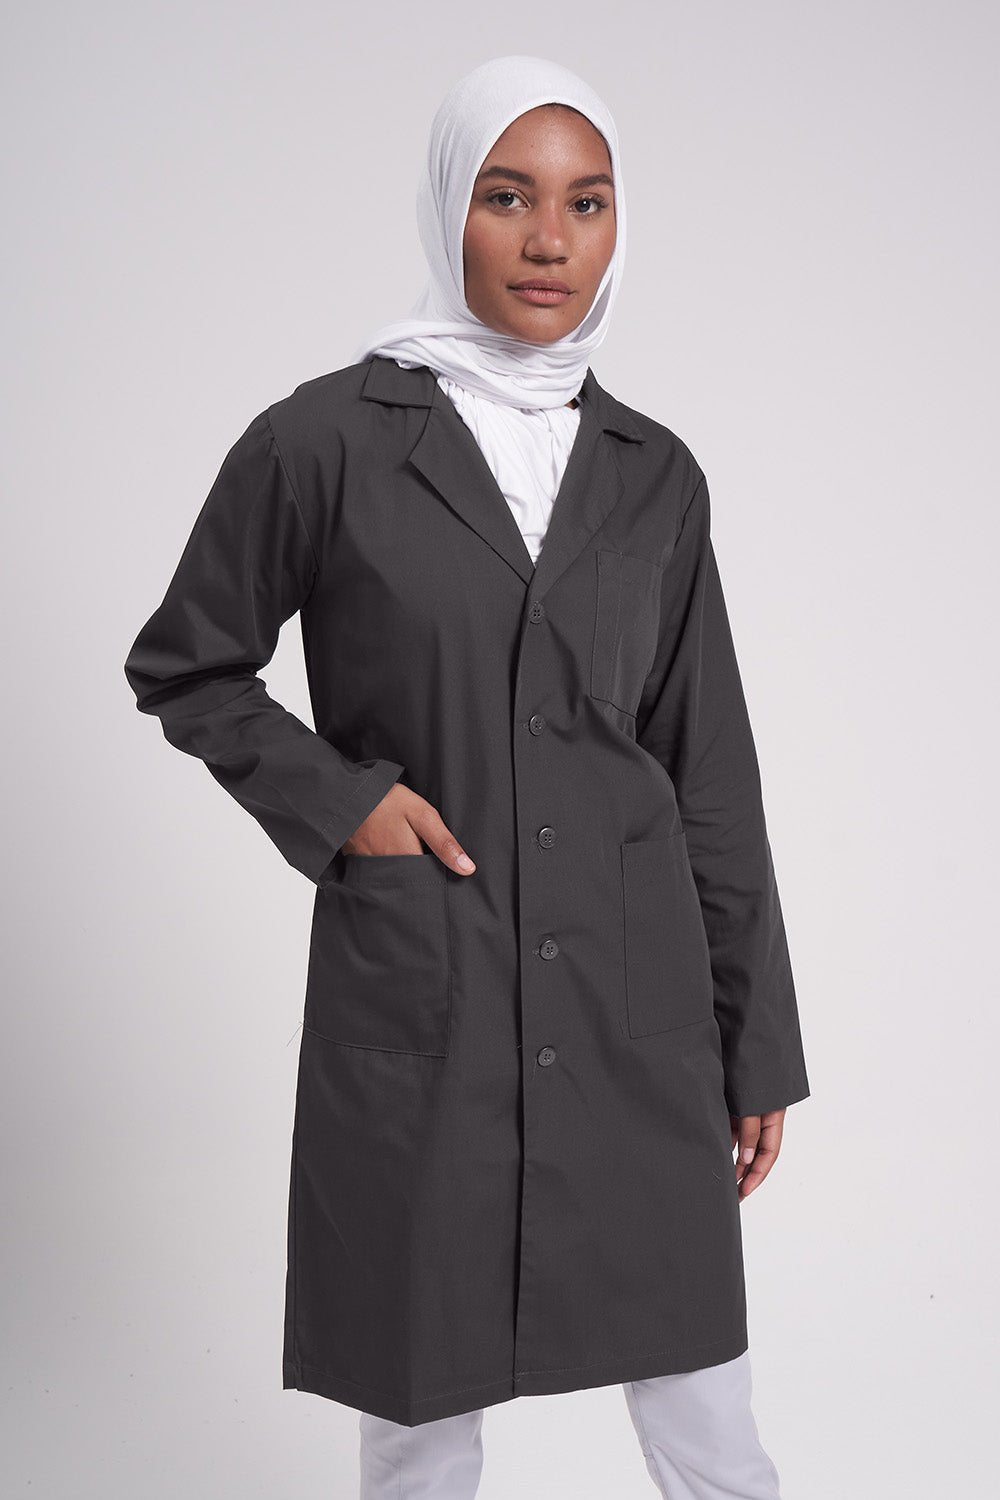 Unisex Labcoat 39" with Inner Pockets 803 - Pewter